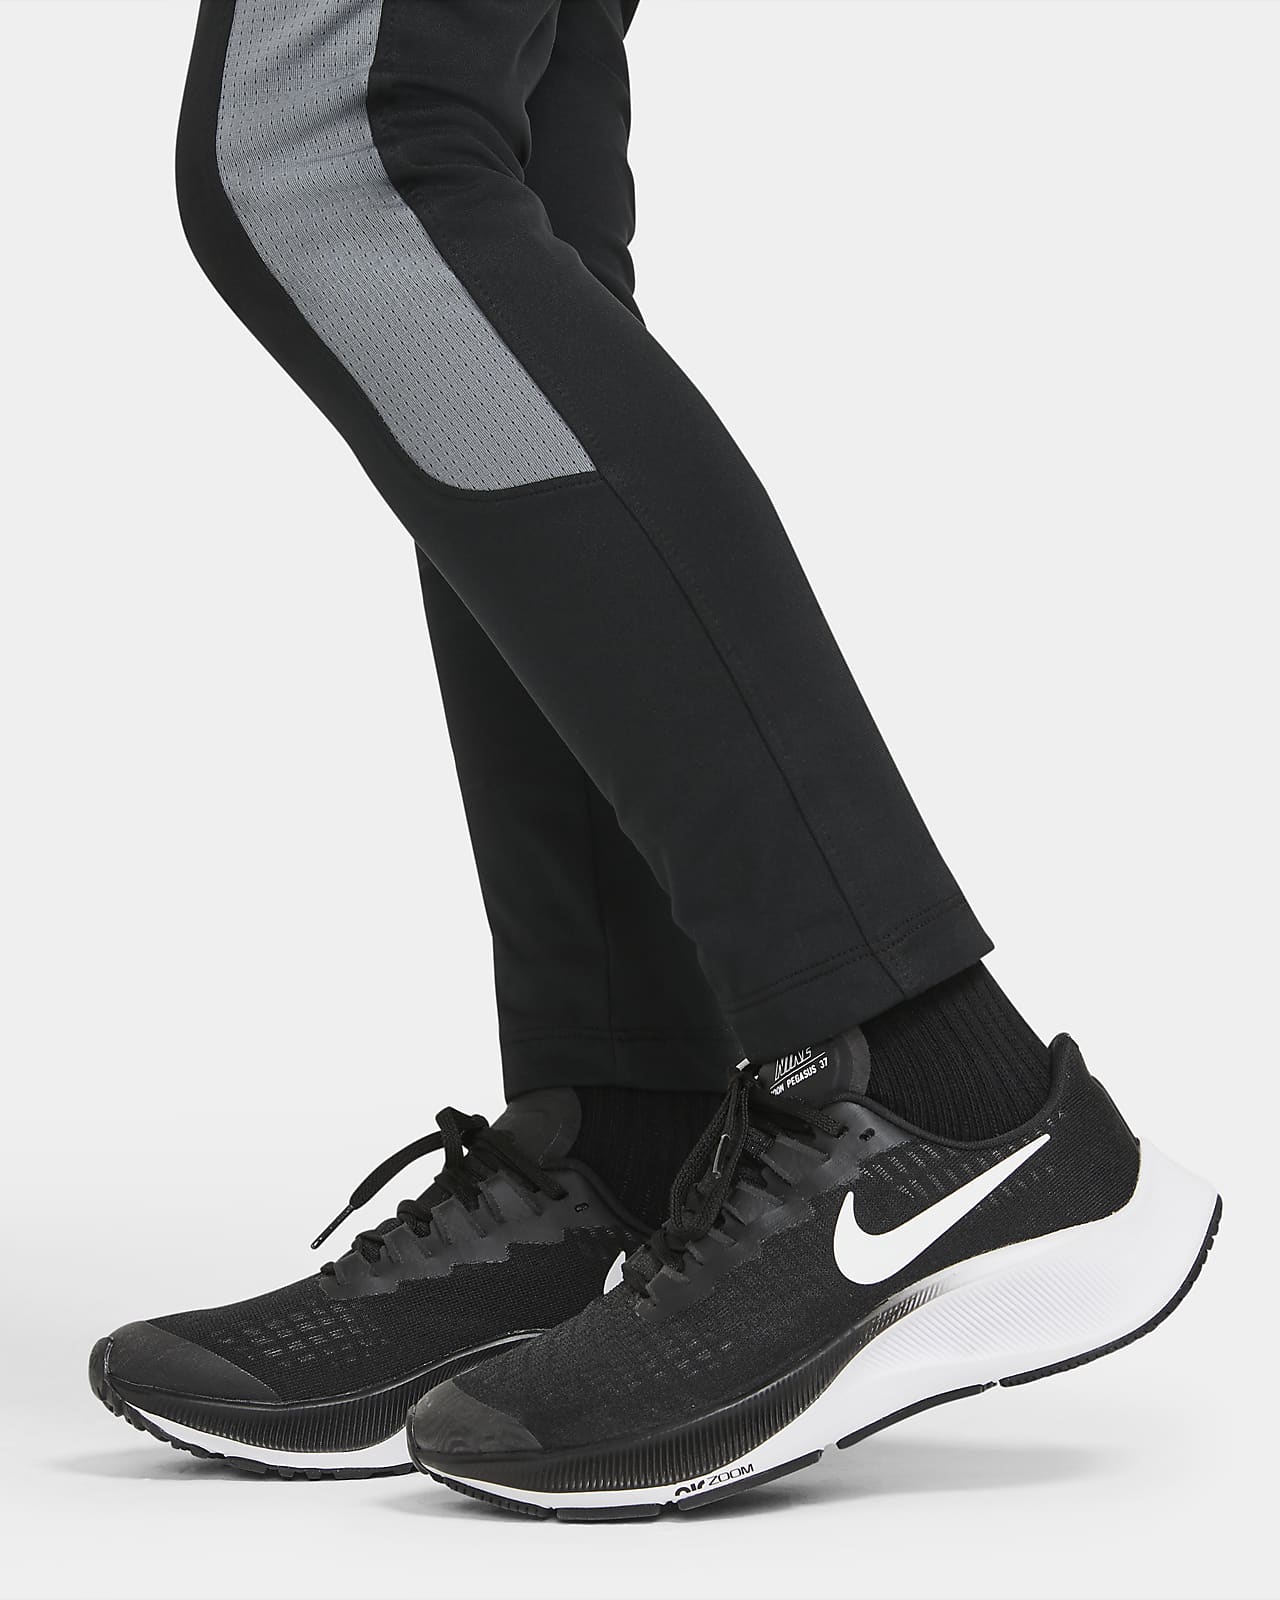 nike trousers for kids